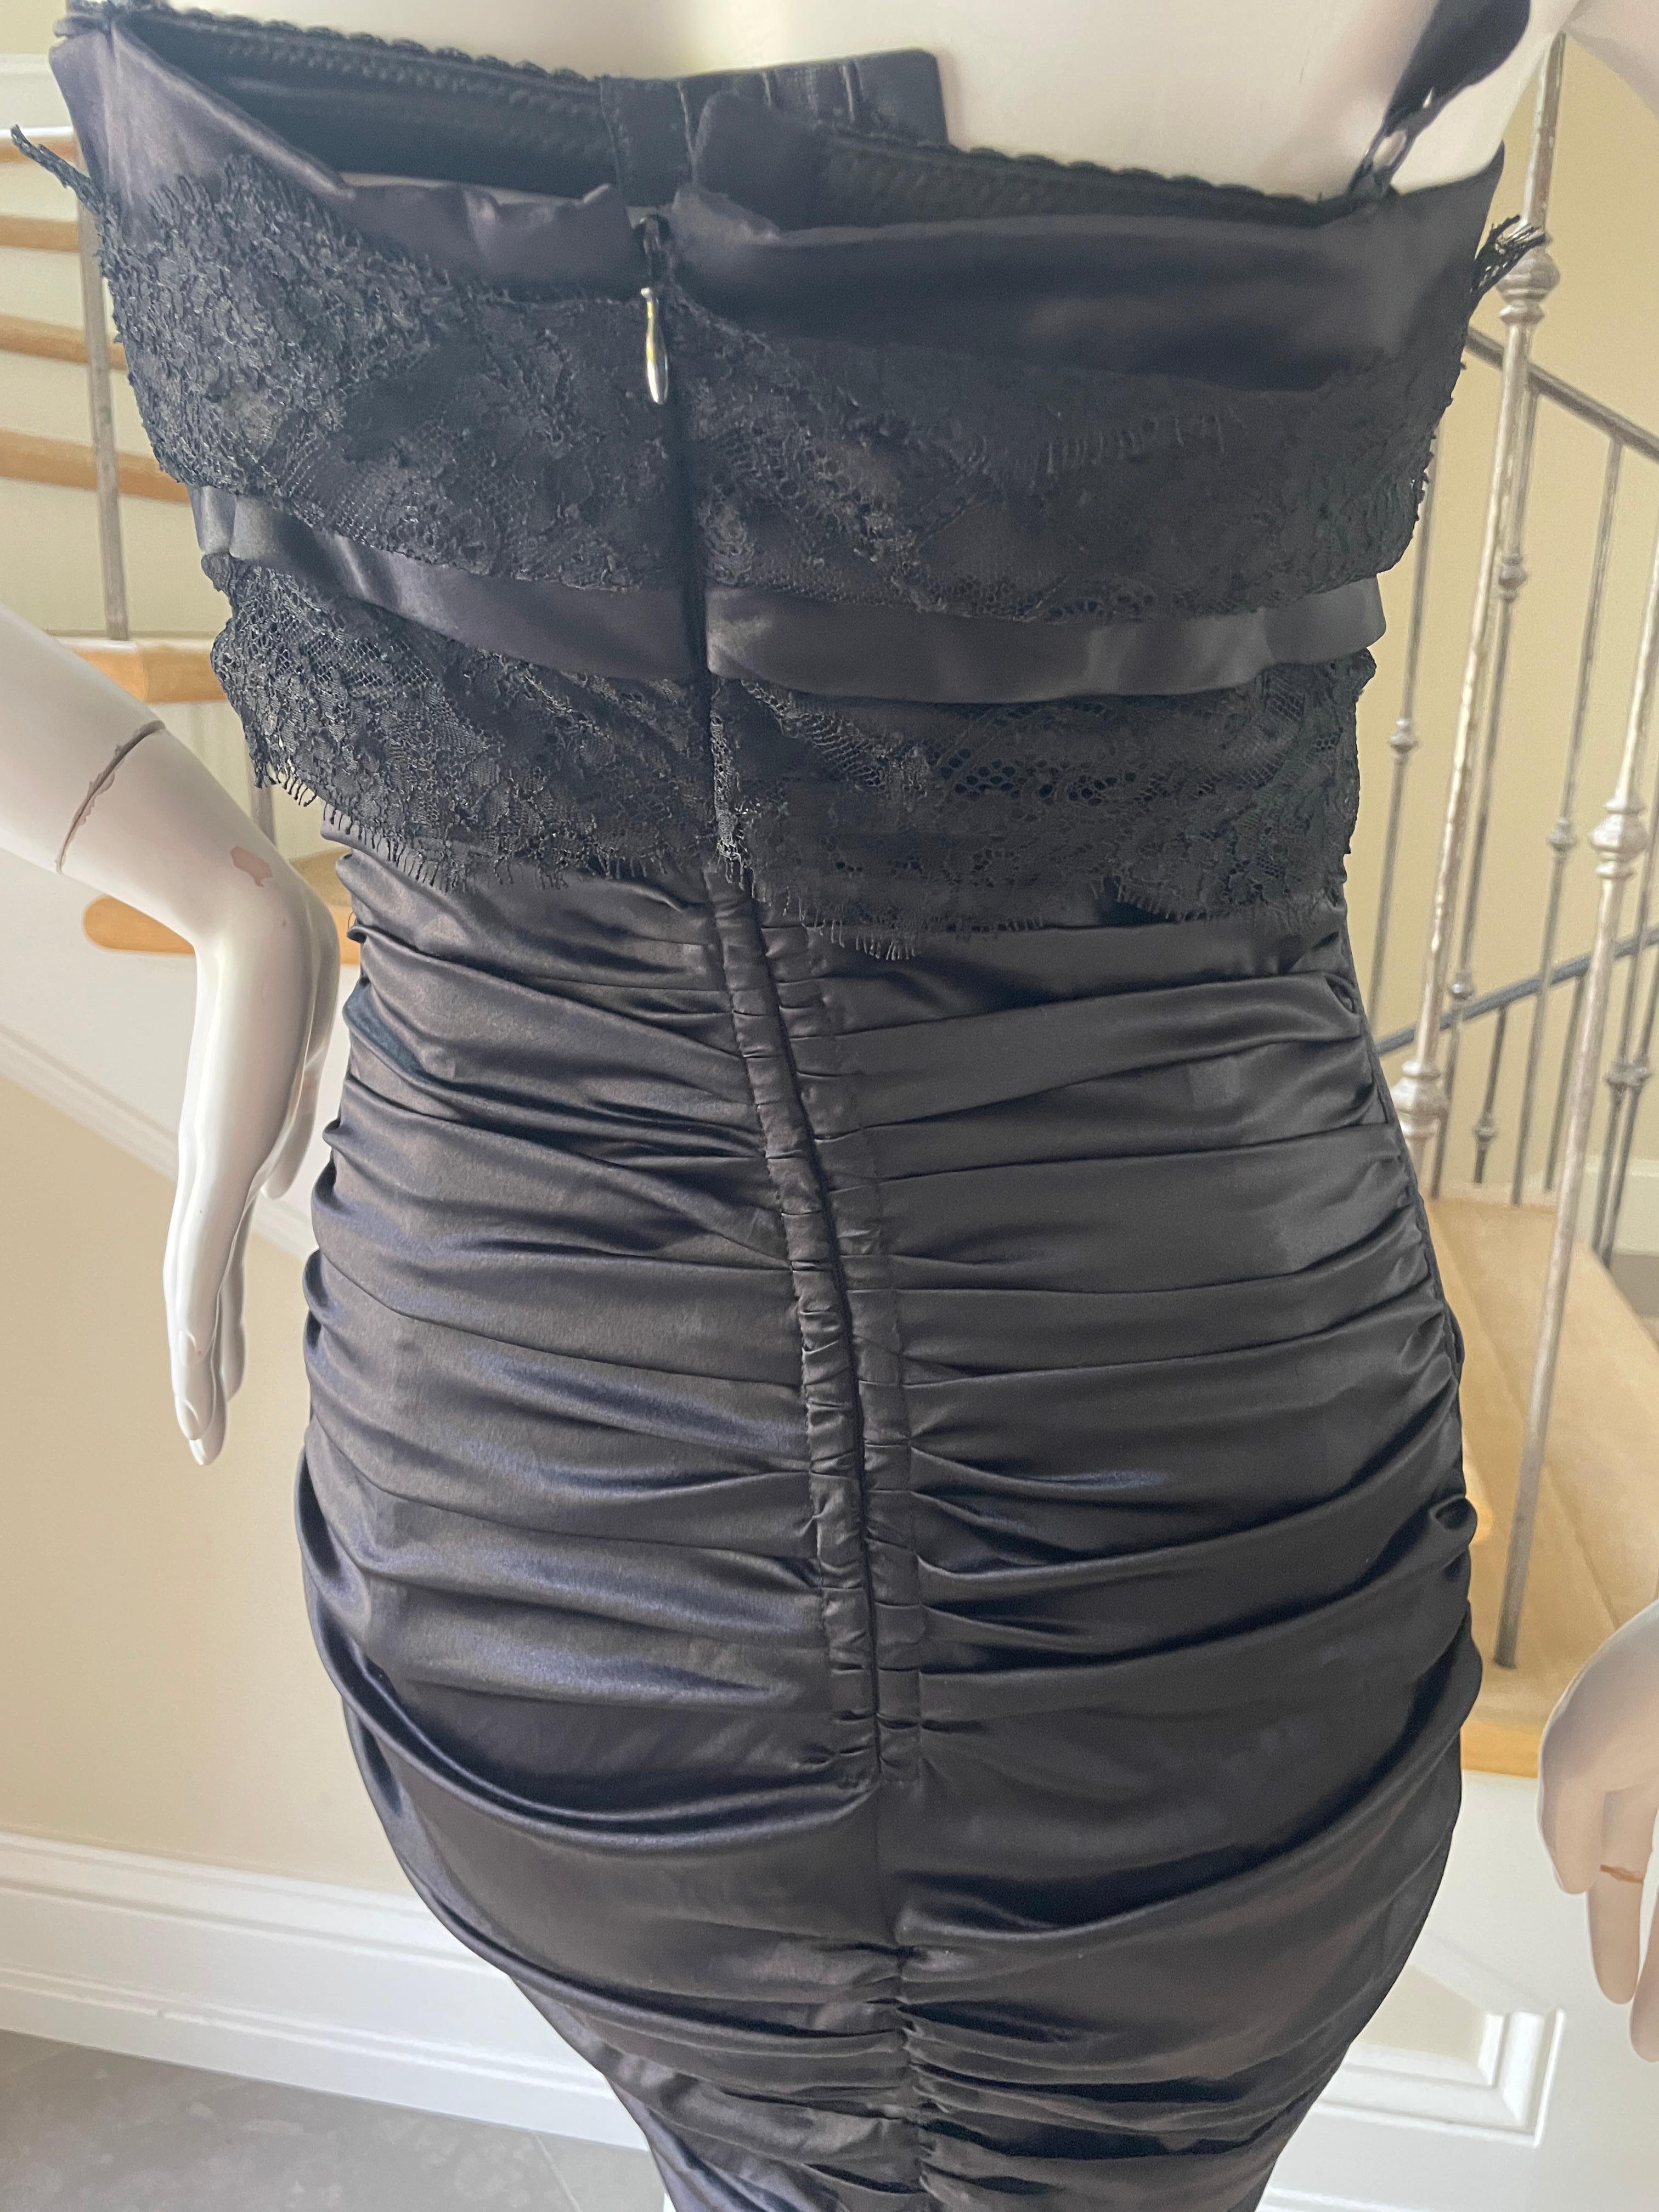 Dolce & Gabbana Vintage Black Cocktail Dress with Lace Bra and Leopard Lining In Excellent Condition For Sale In Cloverdale, CA